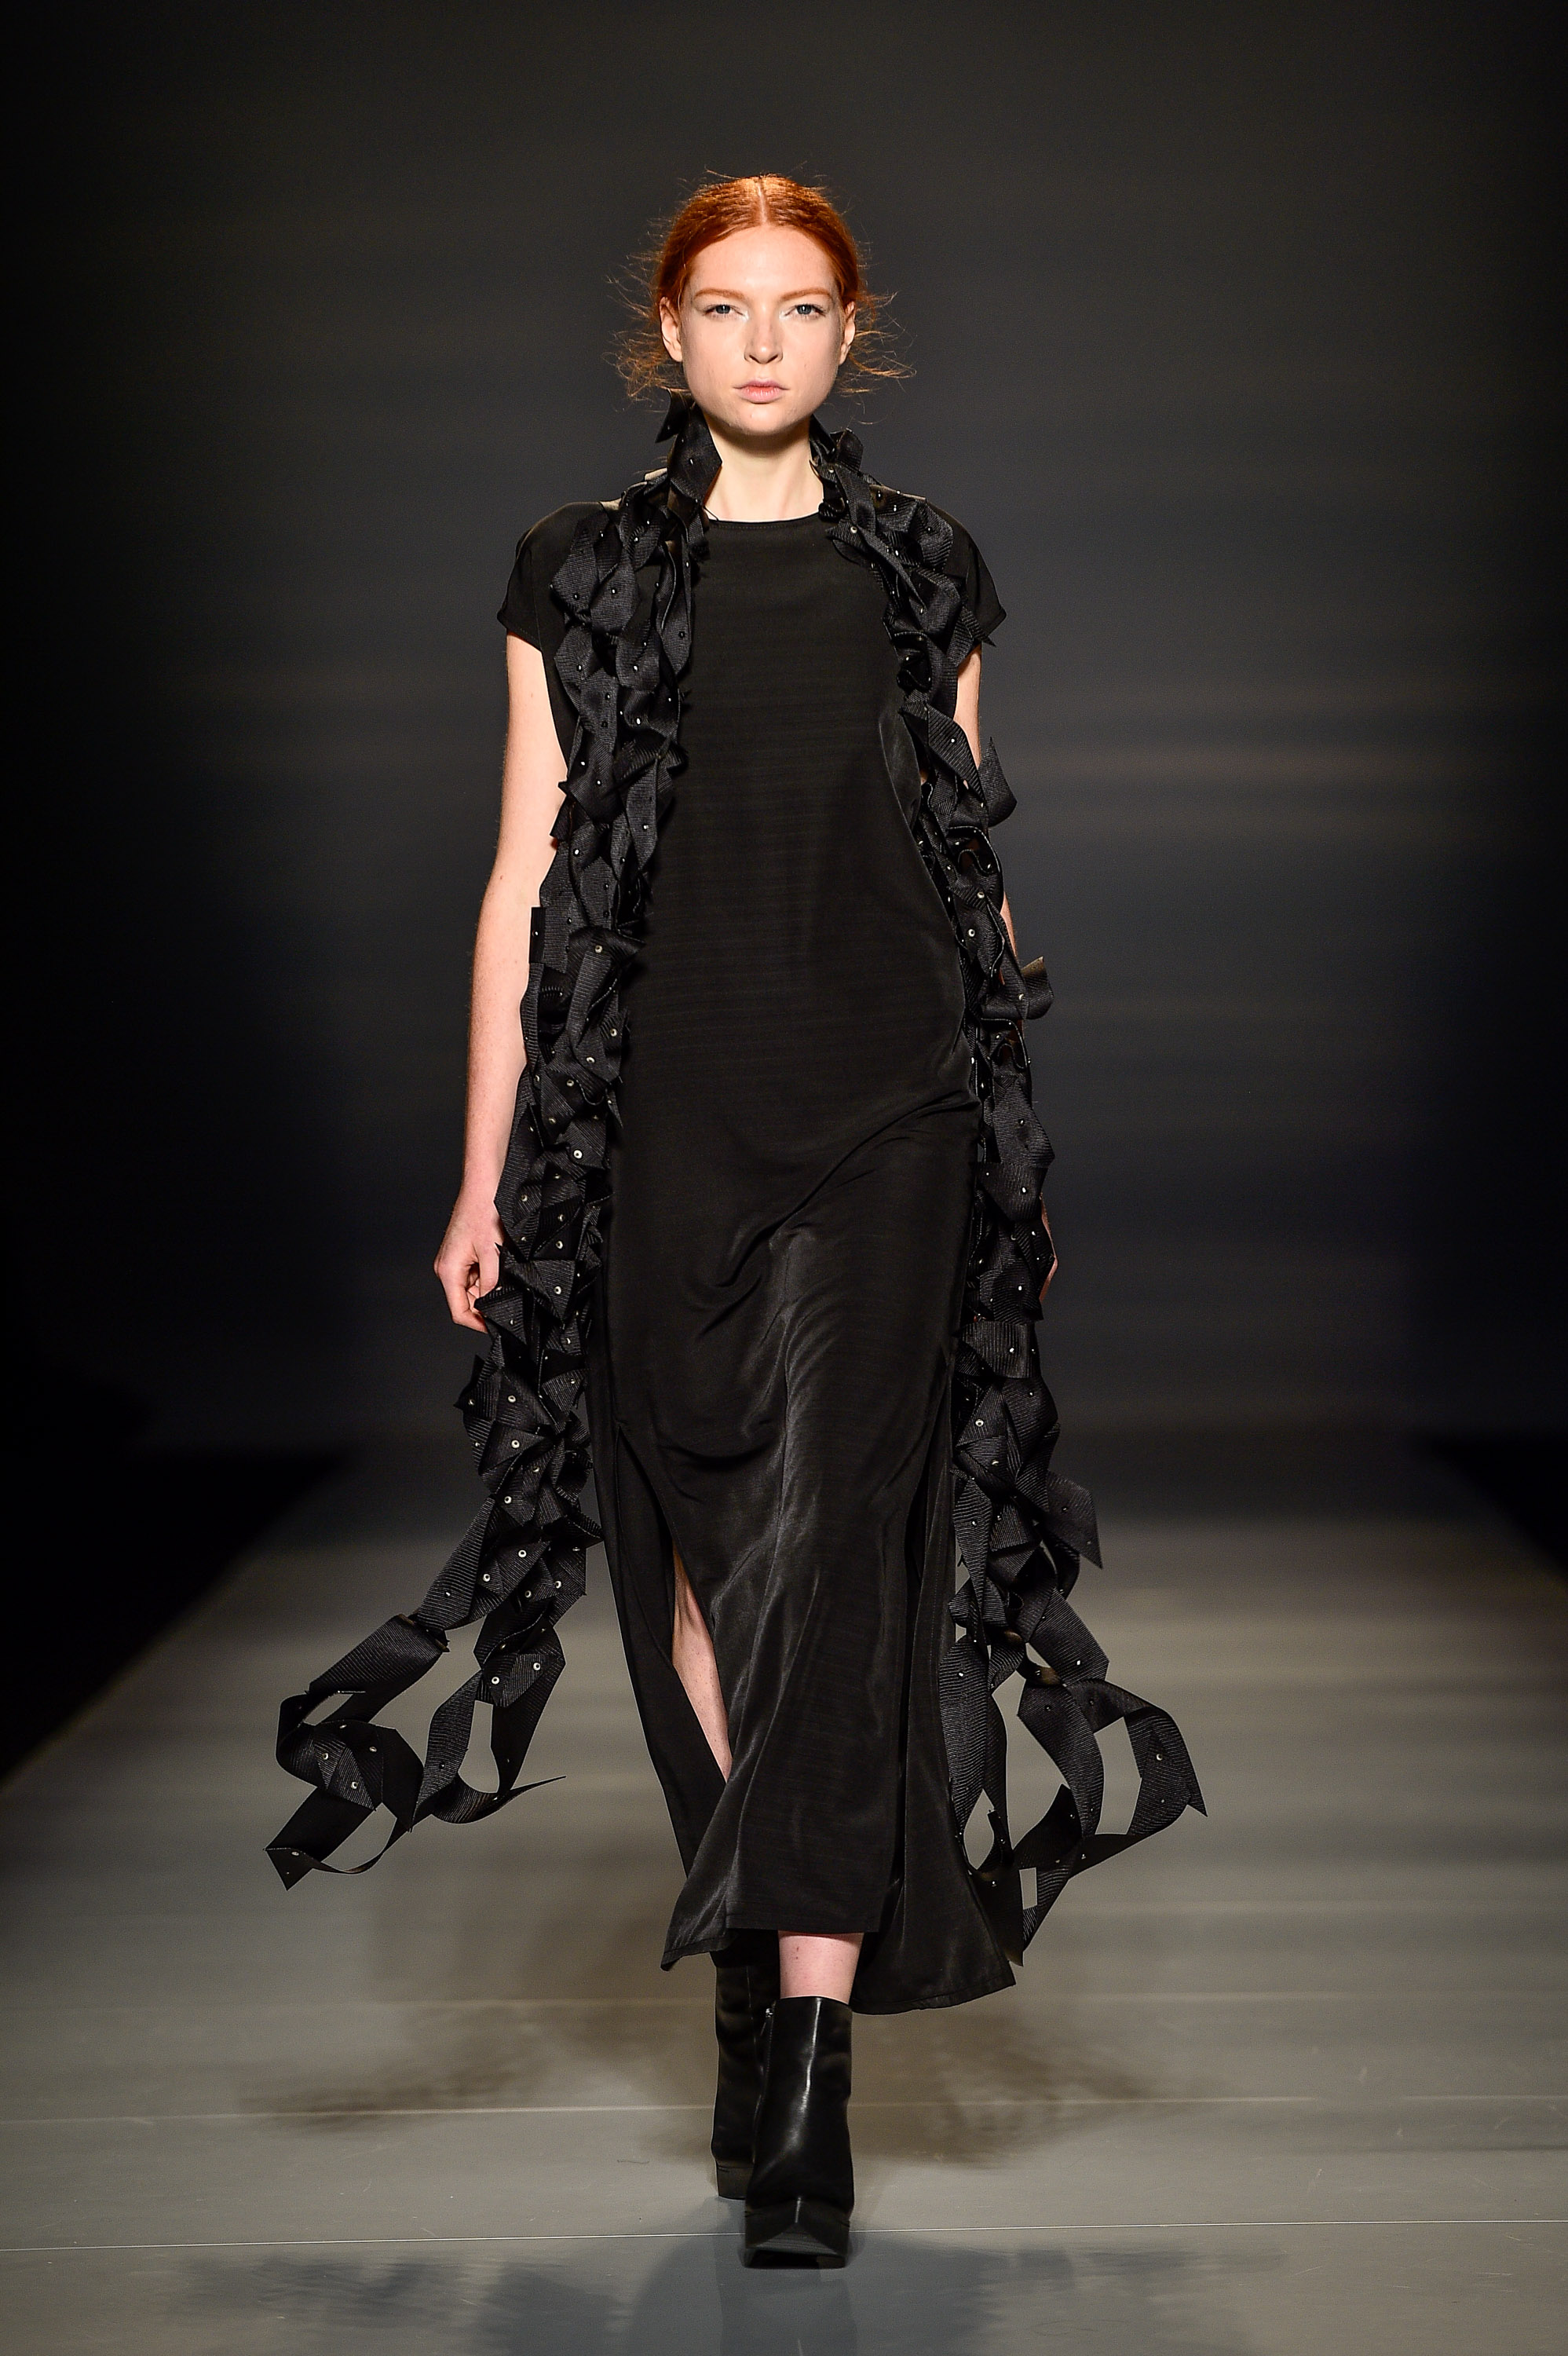 The Looks We Love From Toronto Fashion Week For SS16 - UrbanMoms